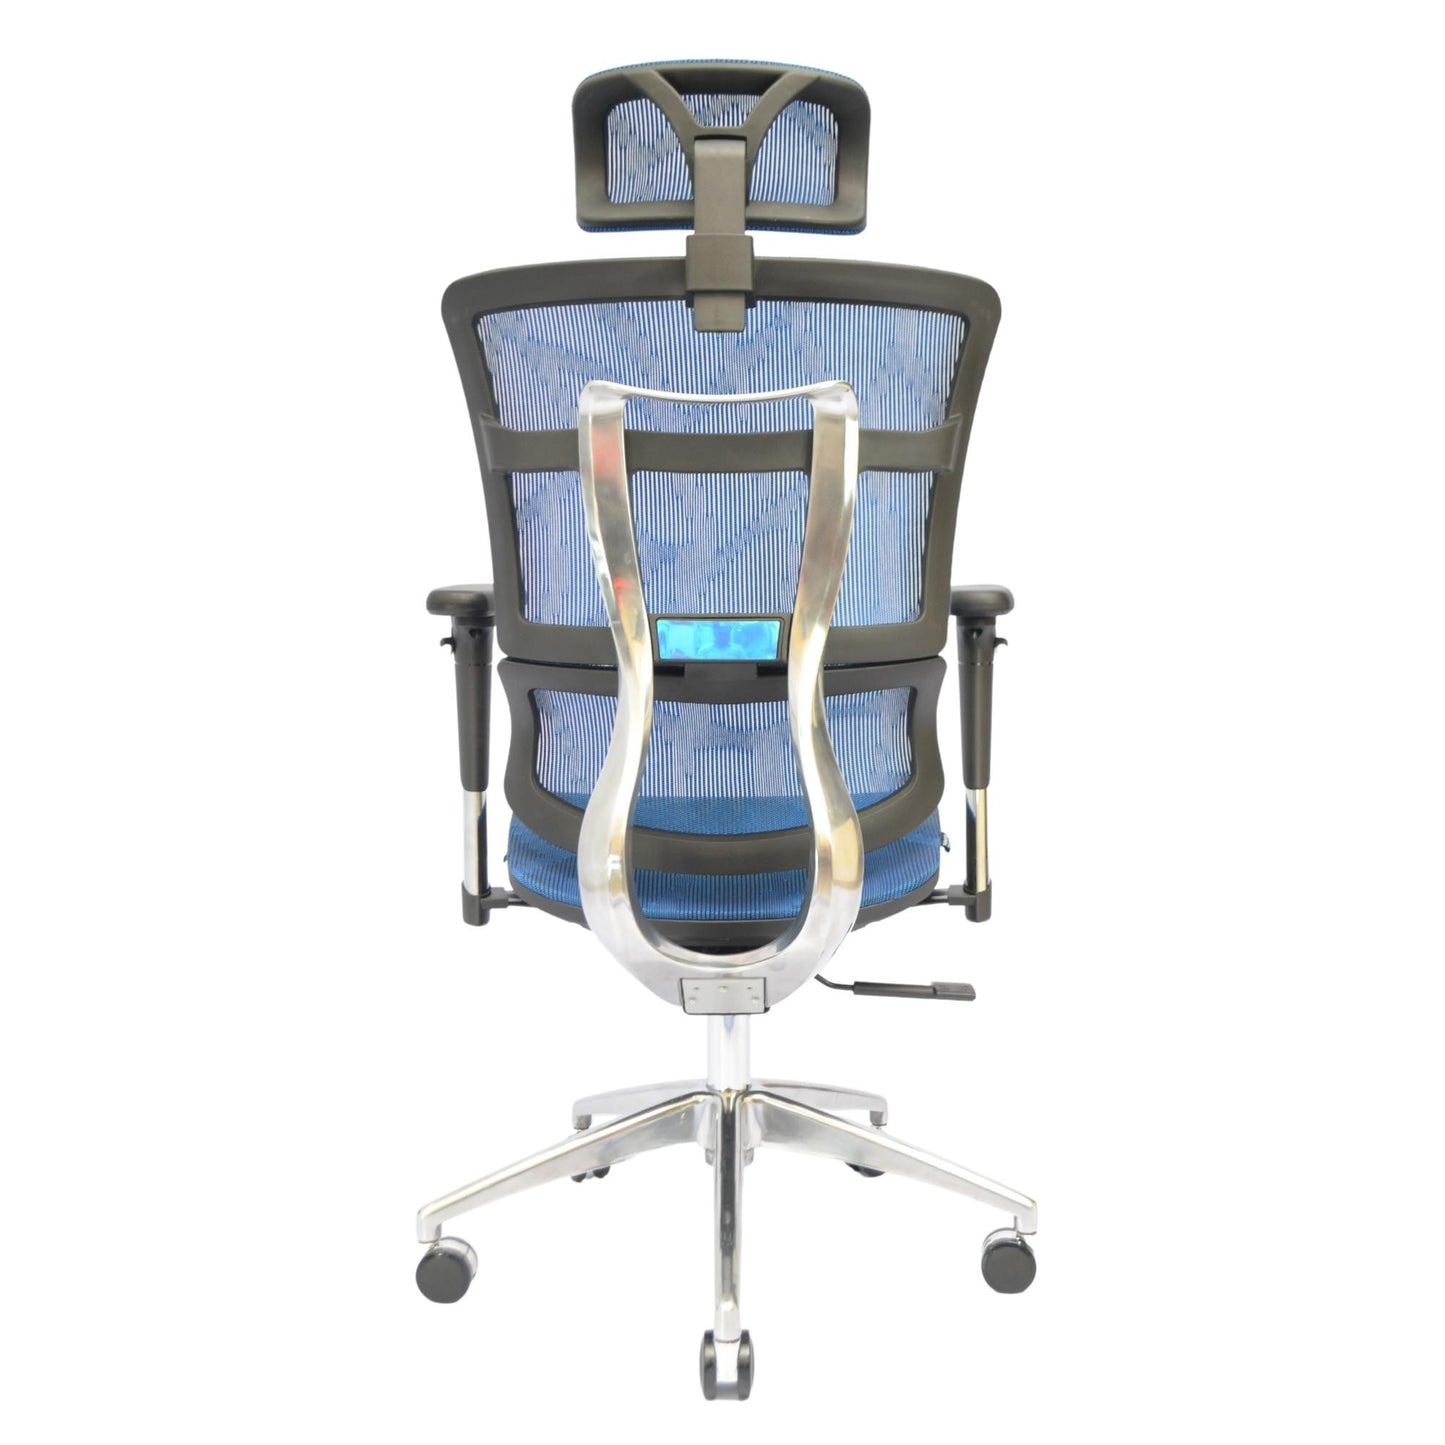 Complete Multifunction Chair (FT-HC03) Blueberry Blue